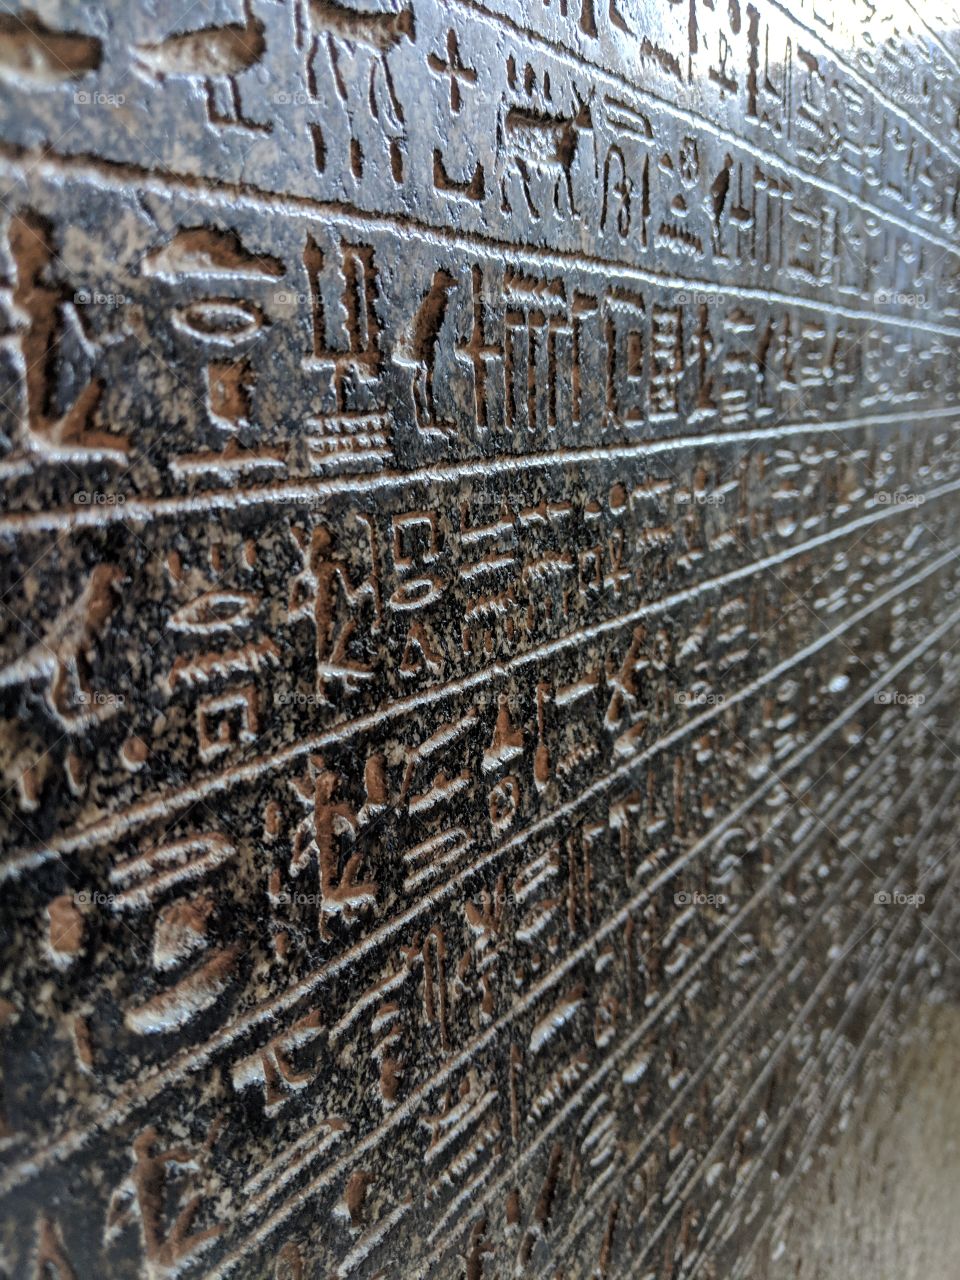 Ancient egyptian heiroglyphics on a slab in the Cairo Museum in Egypt